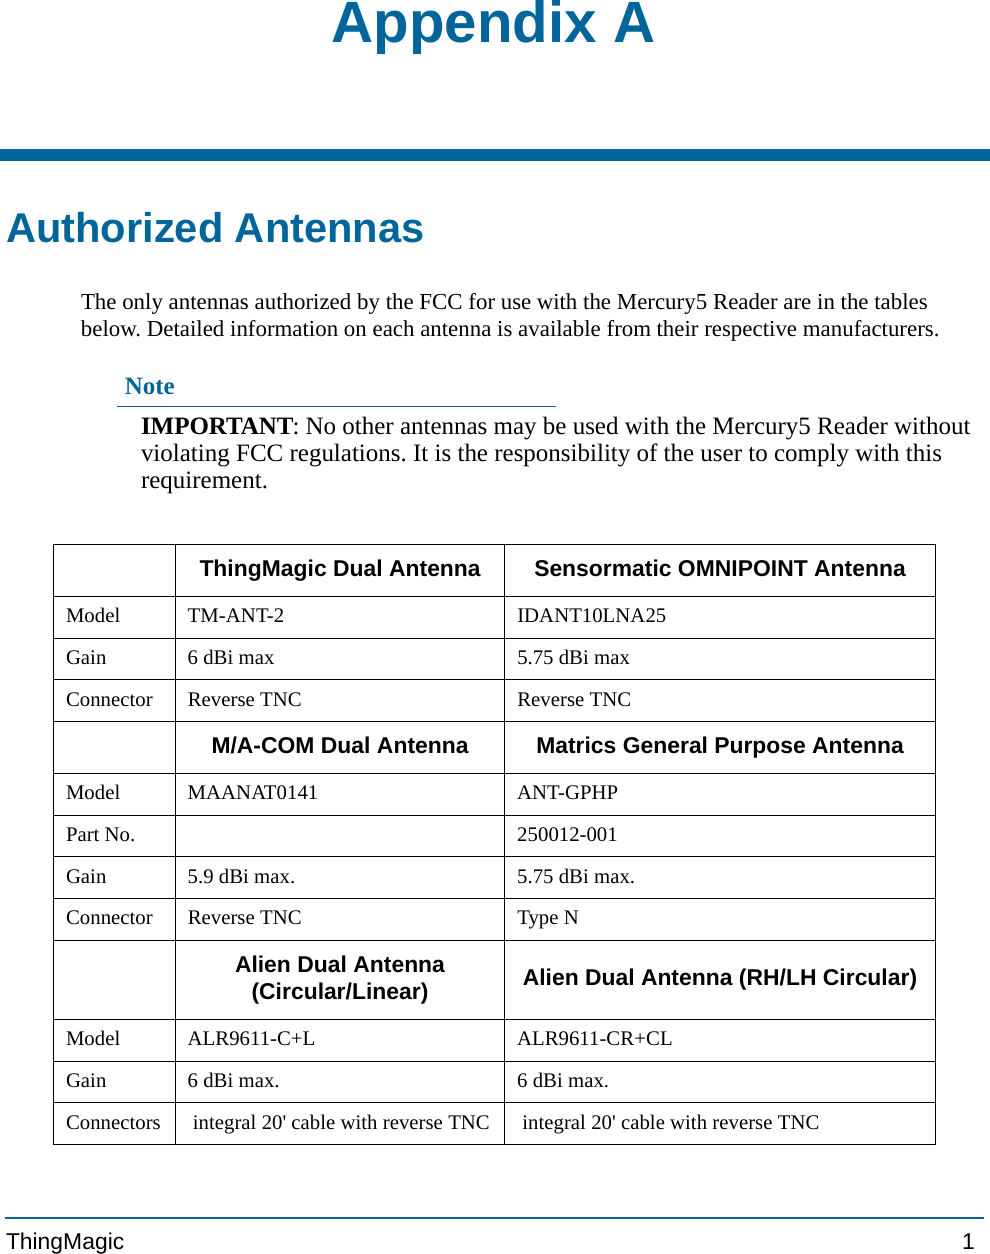 ThingMagic  1 Appendix AAuthorized AntennasThe only antennas authorized by the FCC for use with the Mercury5 Reader are in the tables below. Detailed information on each antenna is available from their respective manufacturers.NoteIMPORTANT: No other antennas may be used with the Mercury5 Reader without violating FCC regulations. It is the responsibility of the user to comply with this requirement.ThingMagic Dual Antenna Sensormatic OMNIPOINT AntennaModel TM-ANT-2 IDANT10LNA25Gain 6 dBi max 5.75 dBi maxConnector Reverse TNC Reverse TNCM/A-COM Dual Antenna Matrics General Purpose AntennaModel MAANAT0141 ANT-GPHPPart No. 250012-001Gain 5.9 dBi max. 5.75 dBi max.Connector Reverse TNC Type NAlien Dual Antenna (Circular/Linear) Alien Dual Antenna (RH/LH Circular)Model ALR9611-C+L ALR9611-CR+CLGain 6 dBi max. 6 dBi max.Connectors  integral 20&apos; cable with reverse TNC  integral 20&apos; cable with reverse TNC